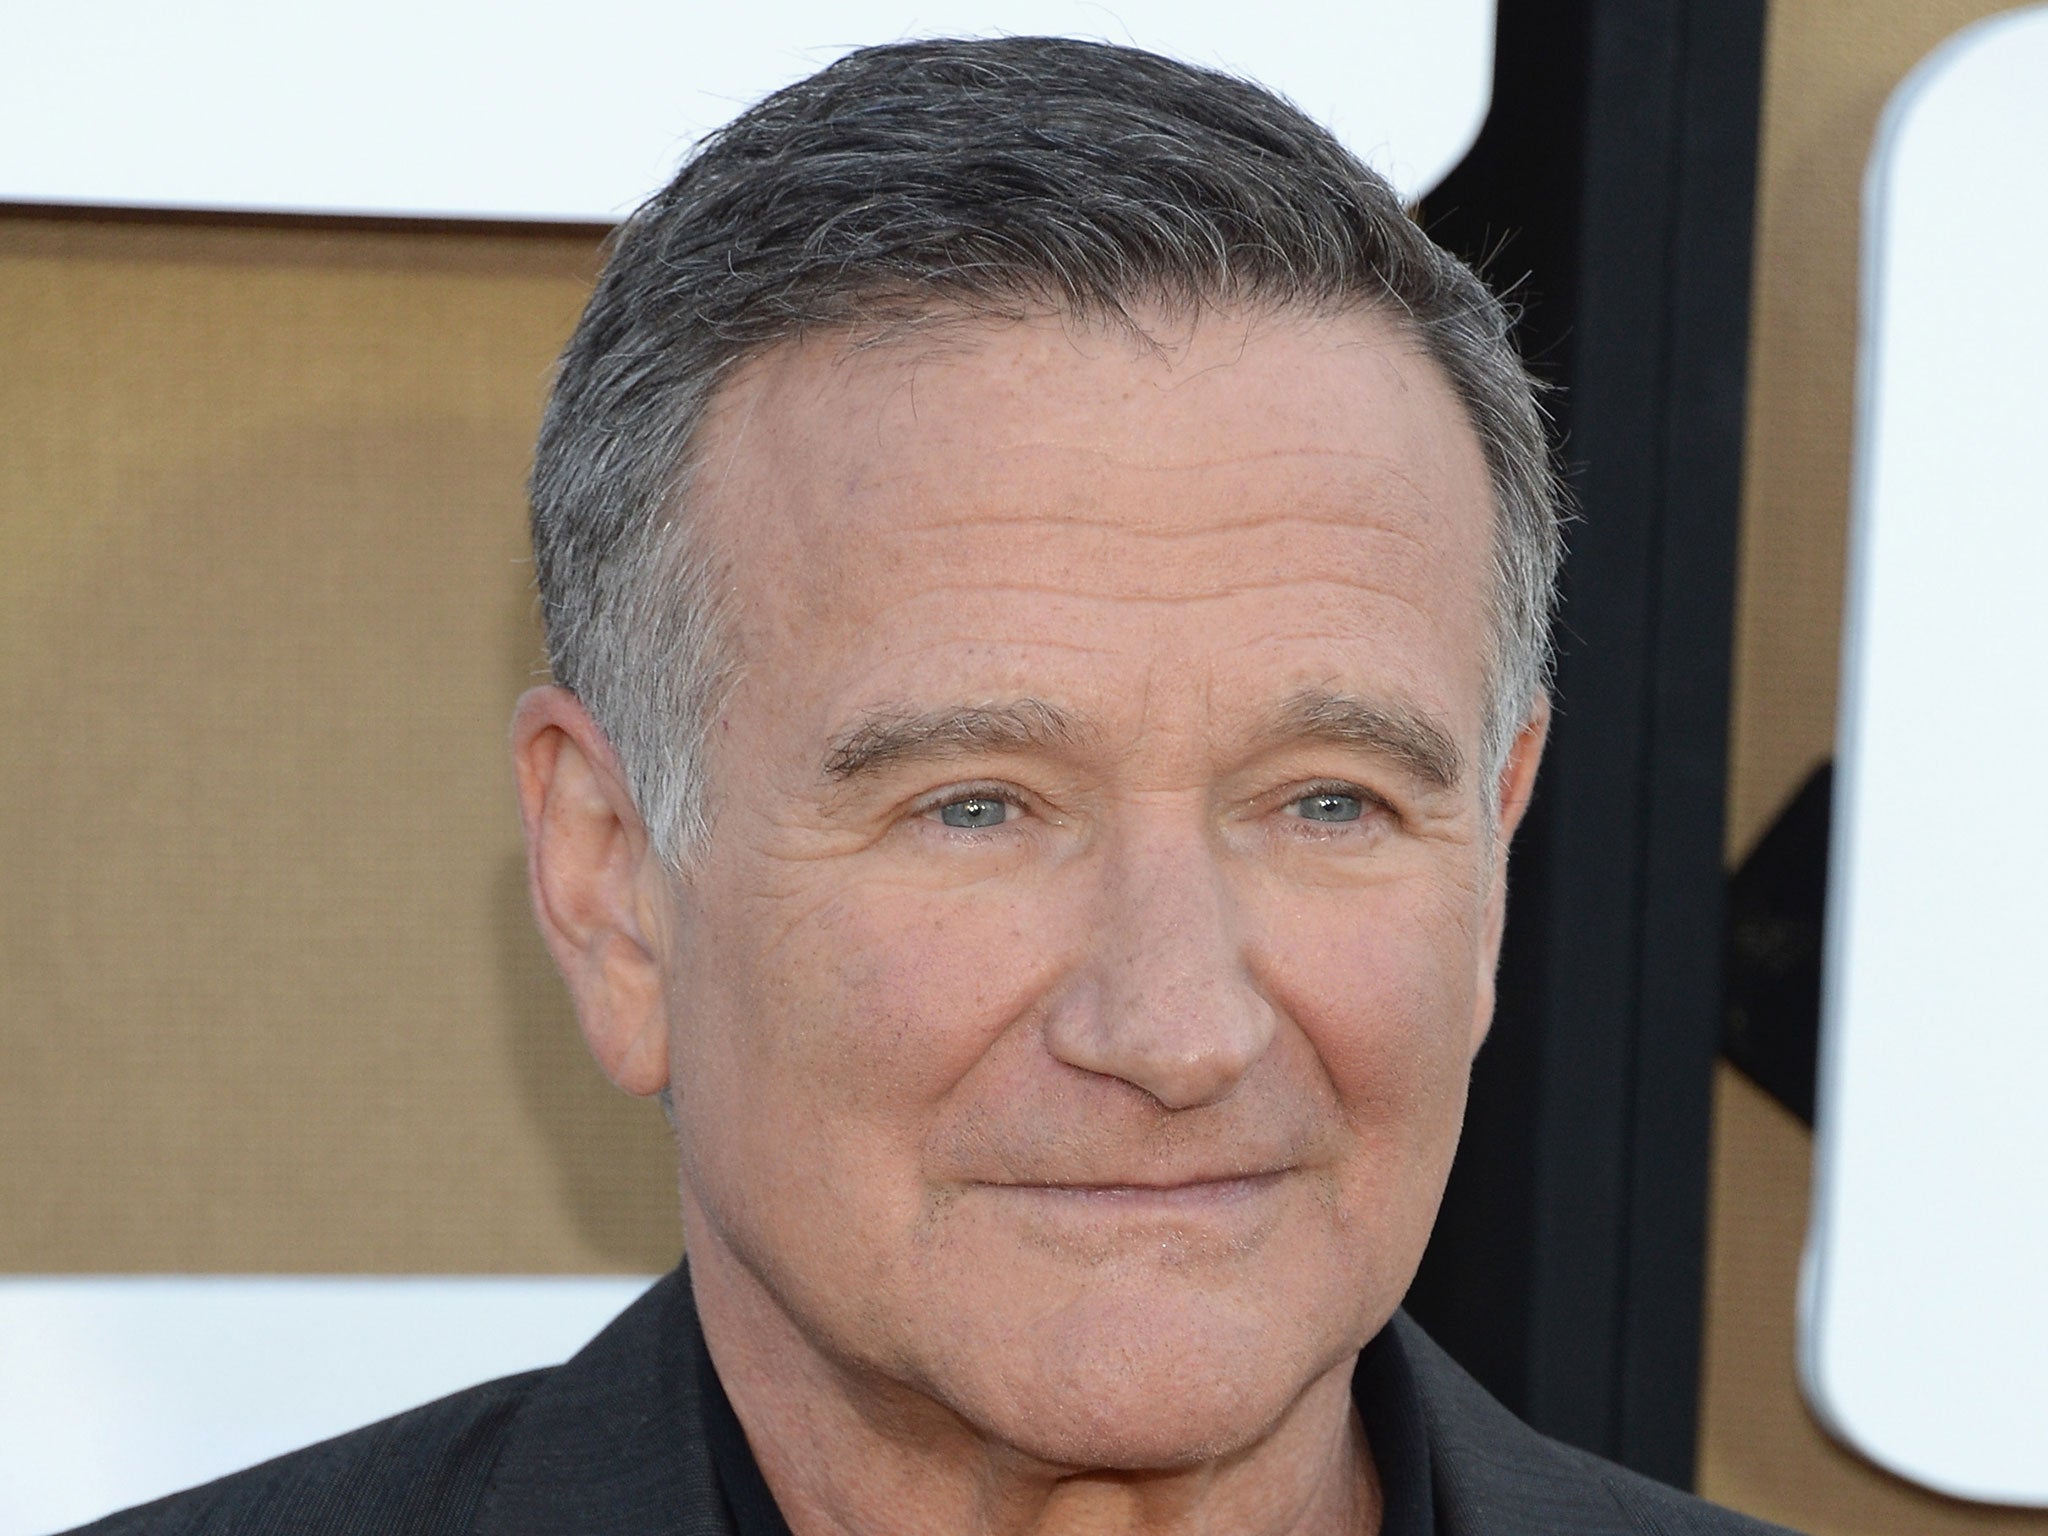 Robin Williams' sudden death has highlighted how important it is for people to have access to information on depression and help if they are suffering with it